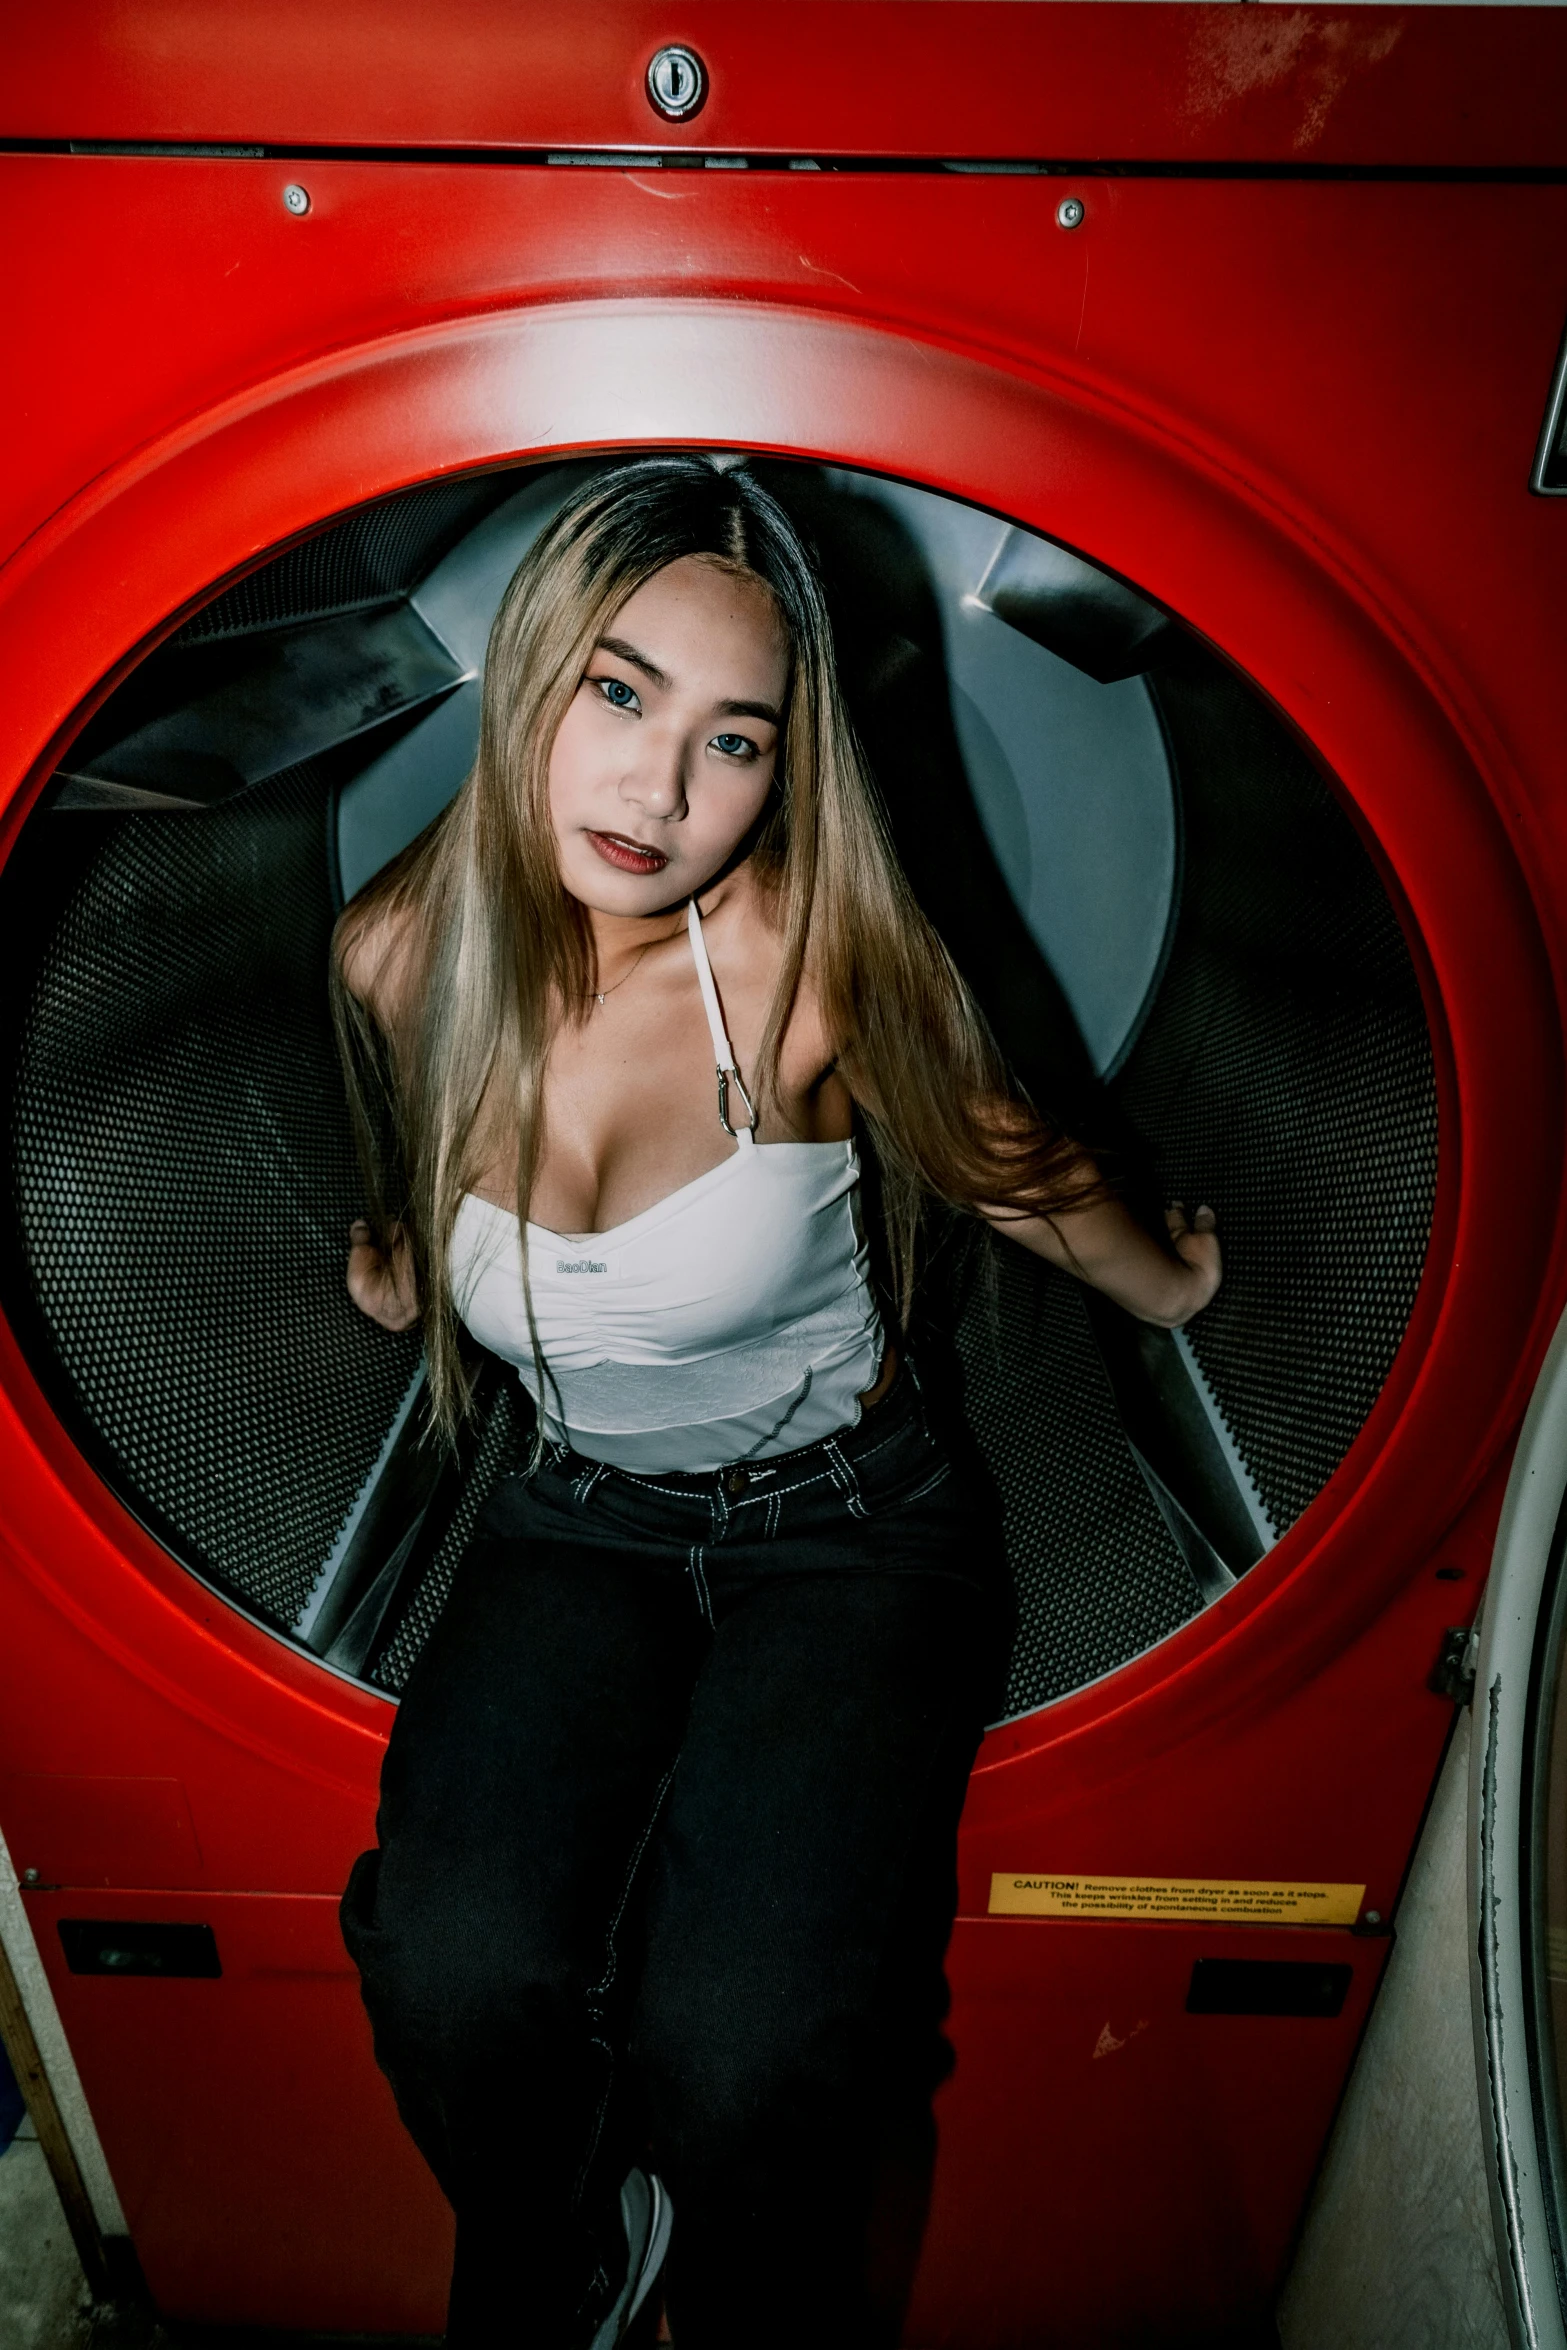 a woman standing in front of a dryer with her headphones on